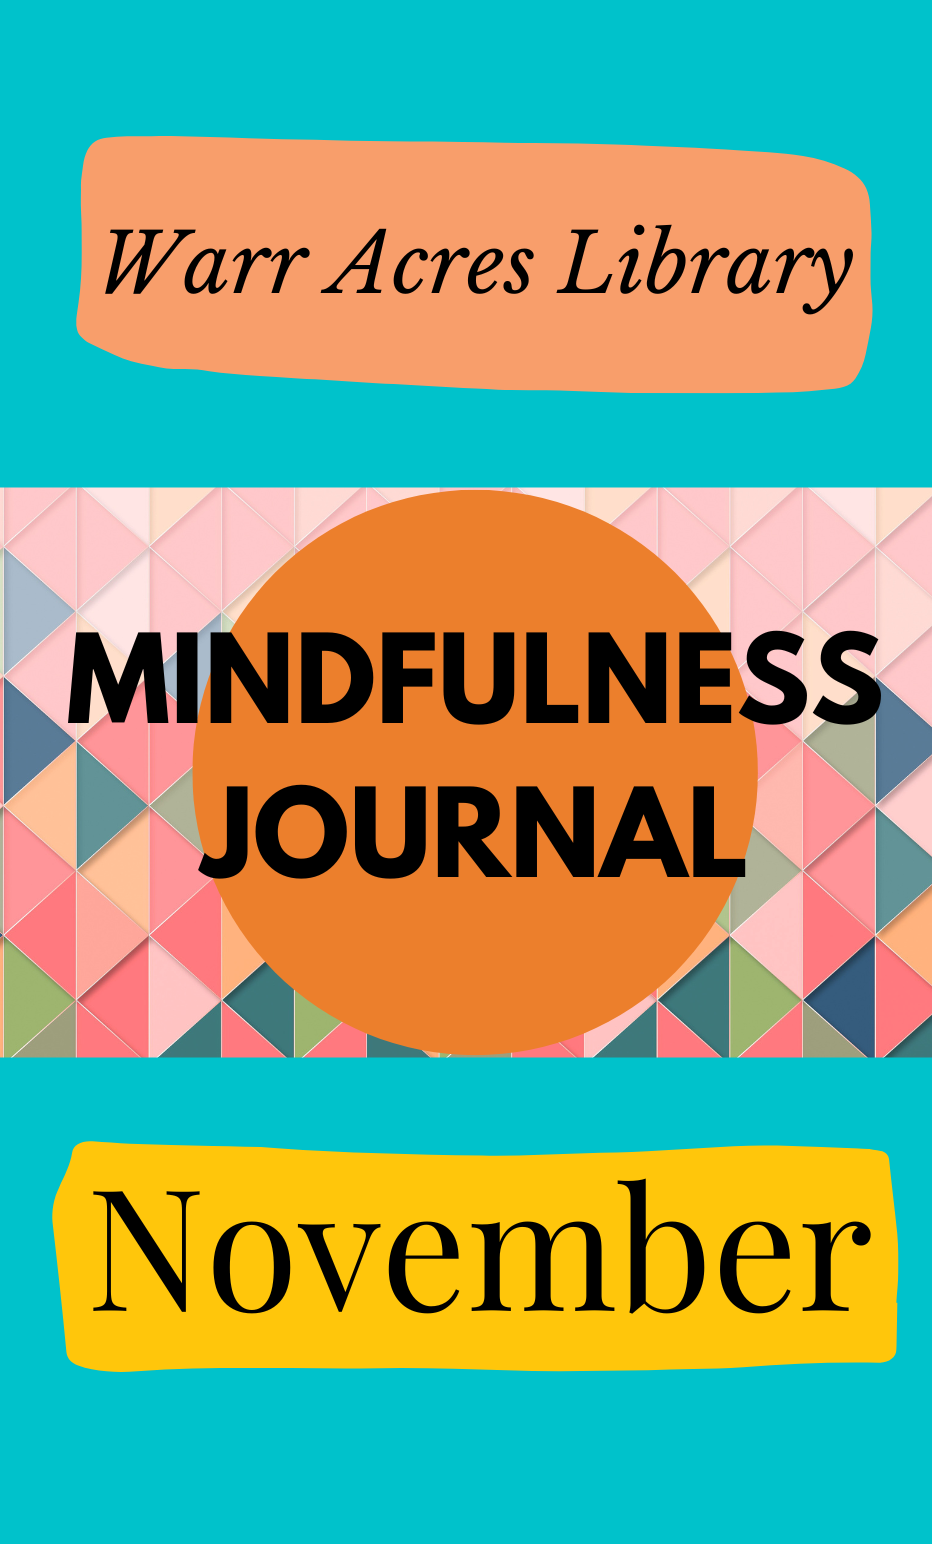 A colorful cover that says, "Warr Acres Library Mindfulness Journal November."